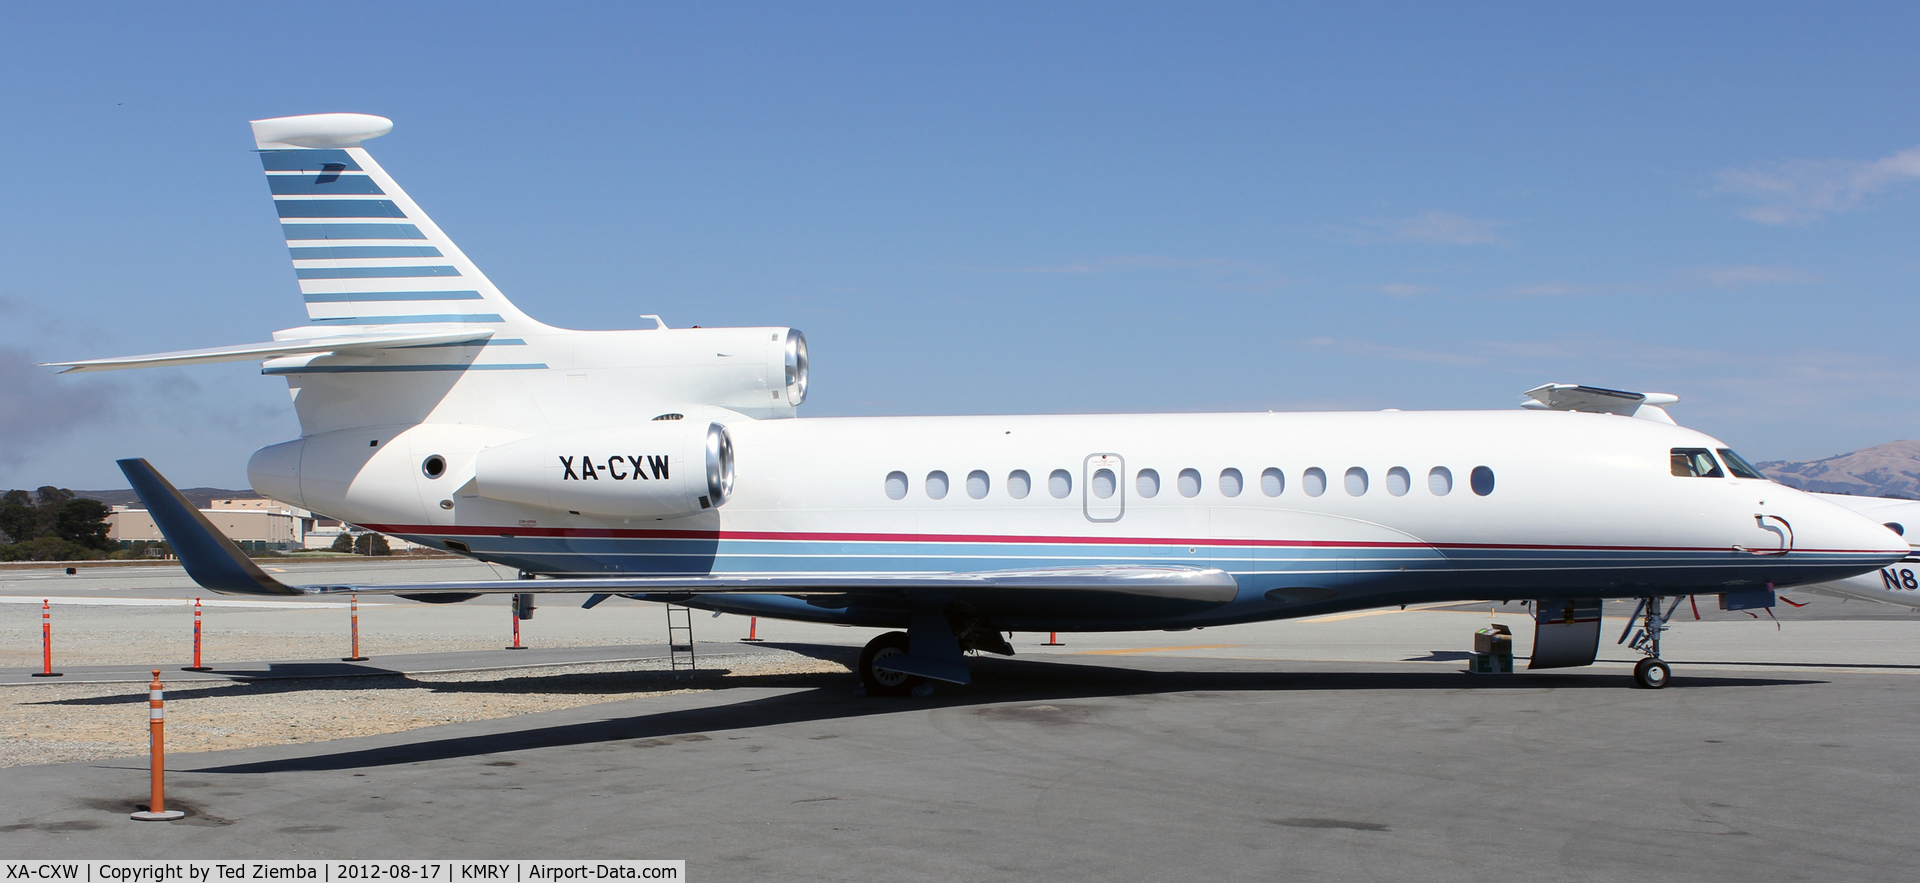 XA-CXW, 2009 Dassault Falcon 7X C/N 032, One of over a hundred aircraft that flew in for Monterey Car Week 2012.